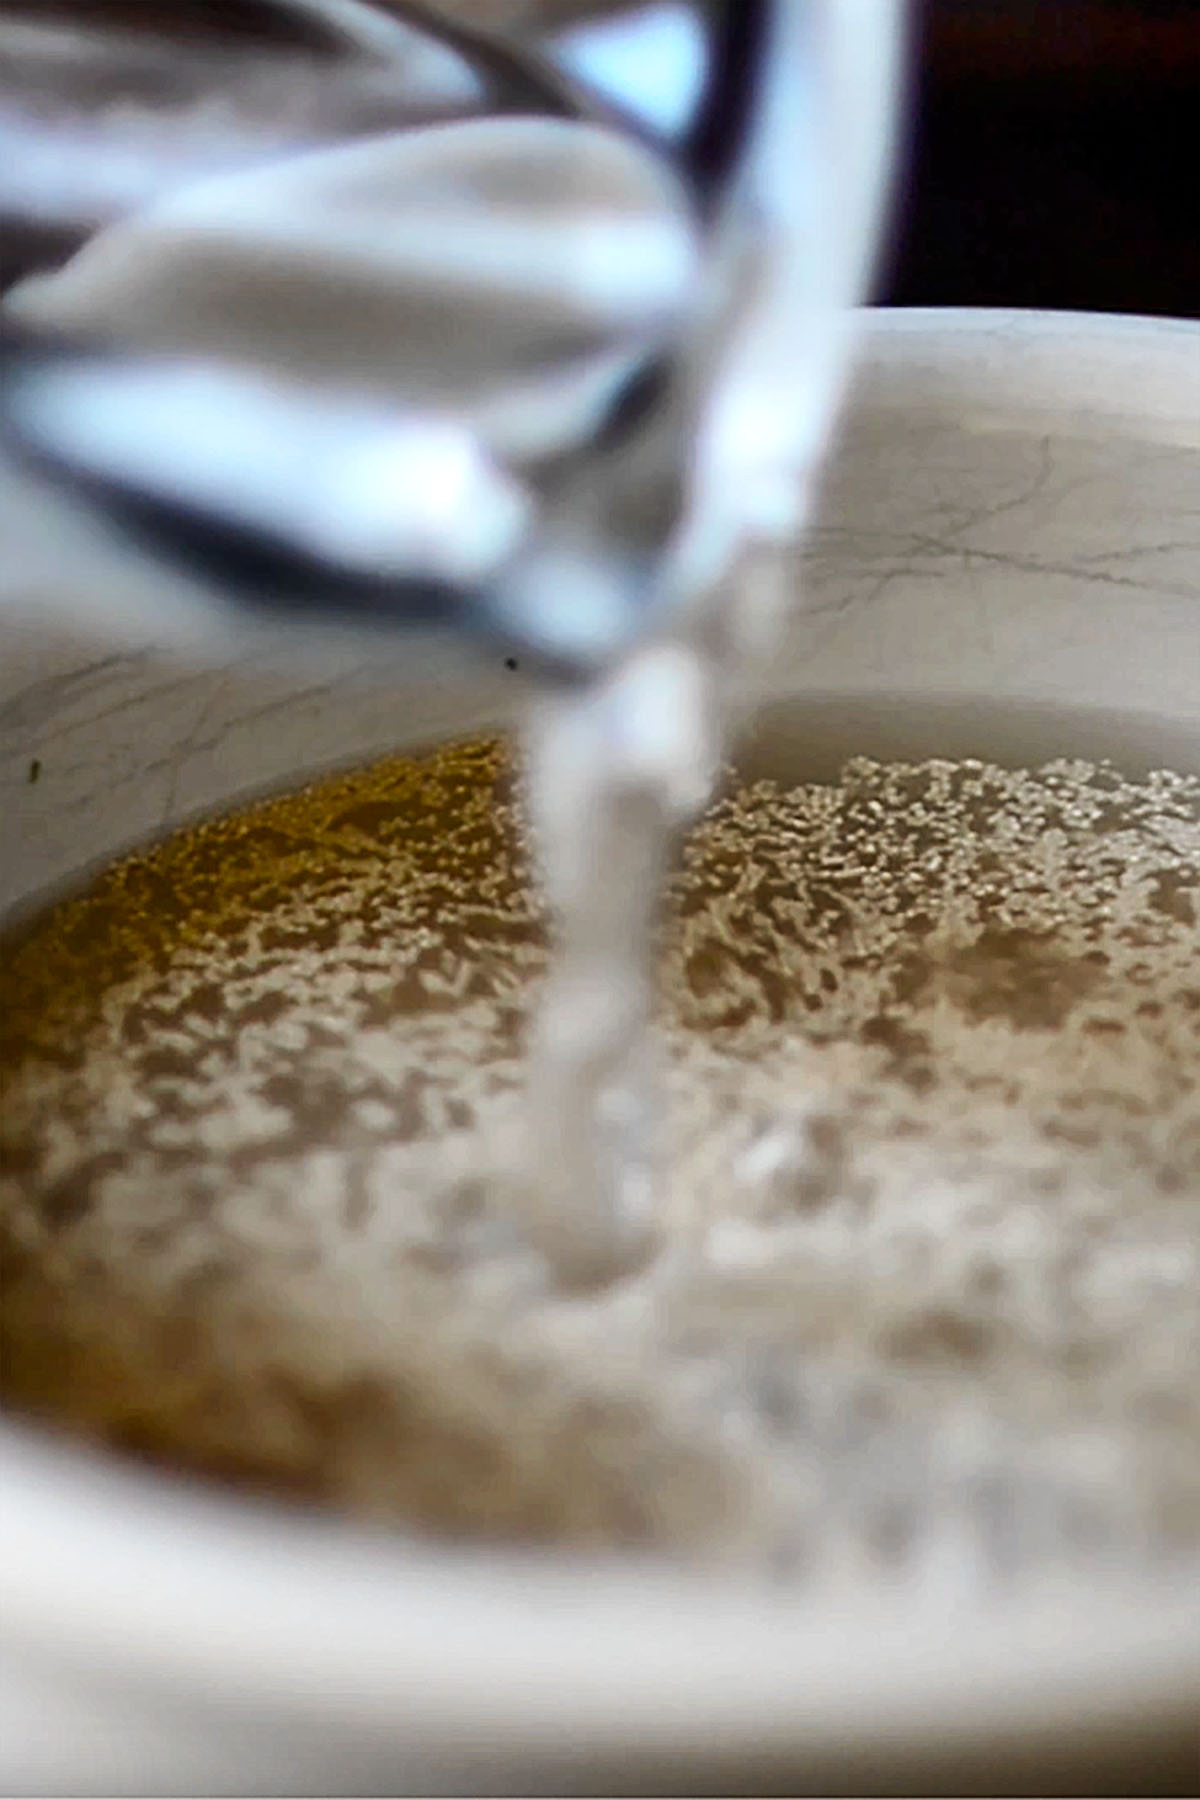 Water being poured into a bowl or yeast.